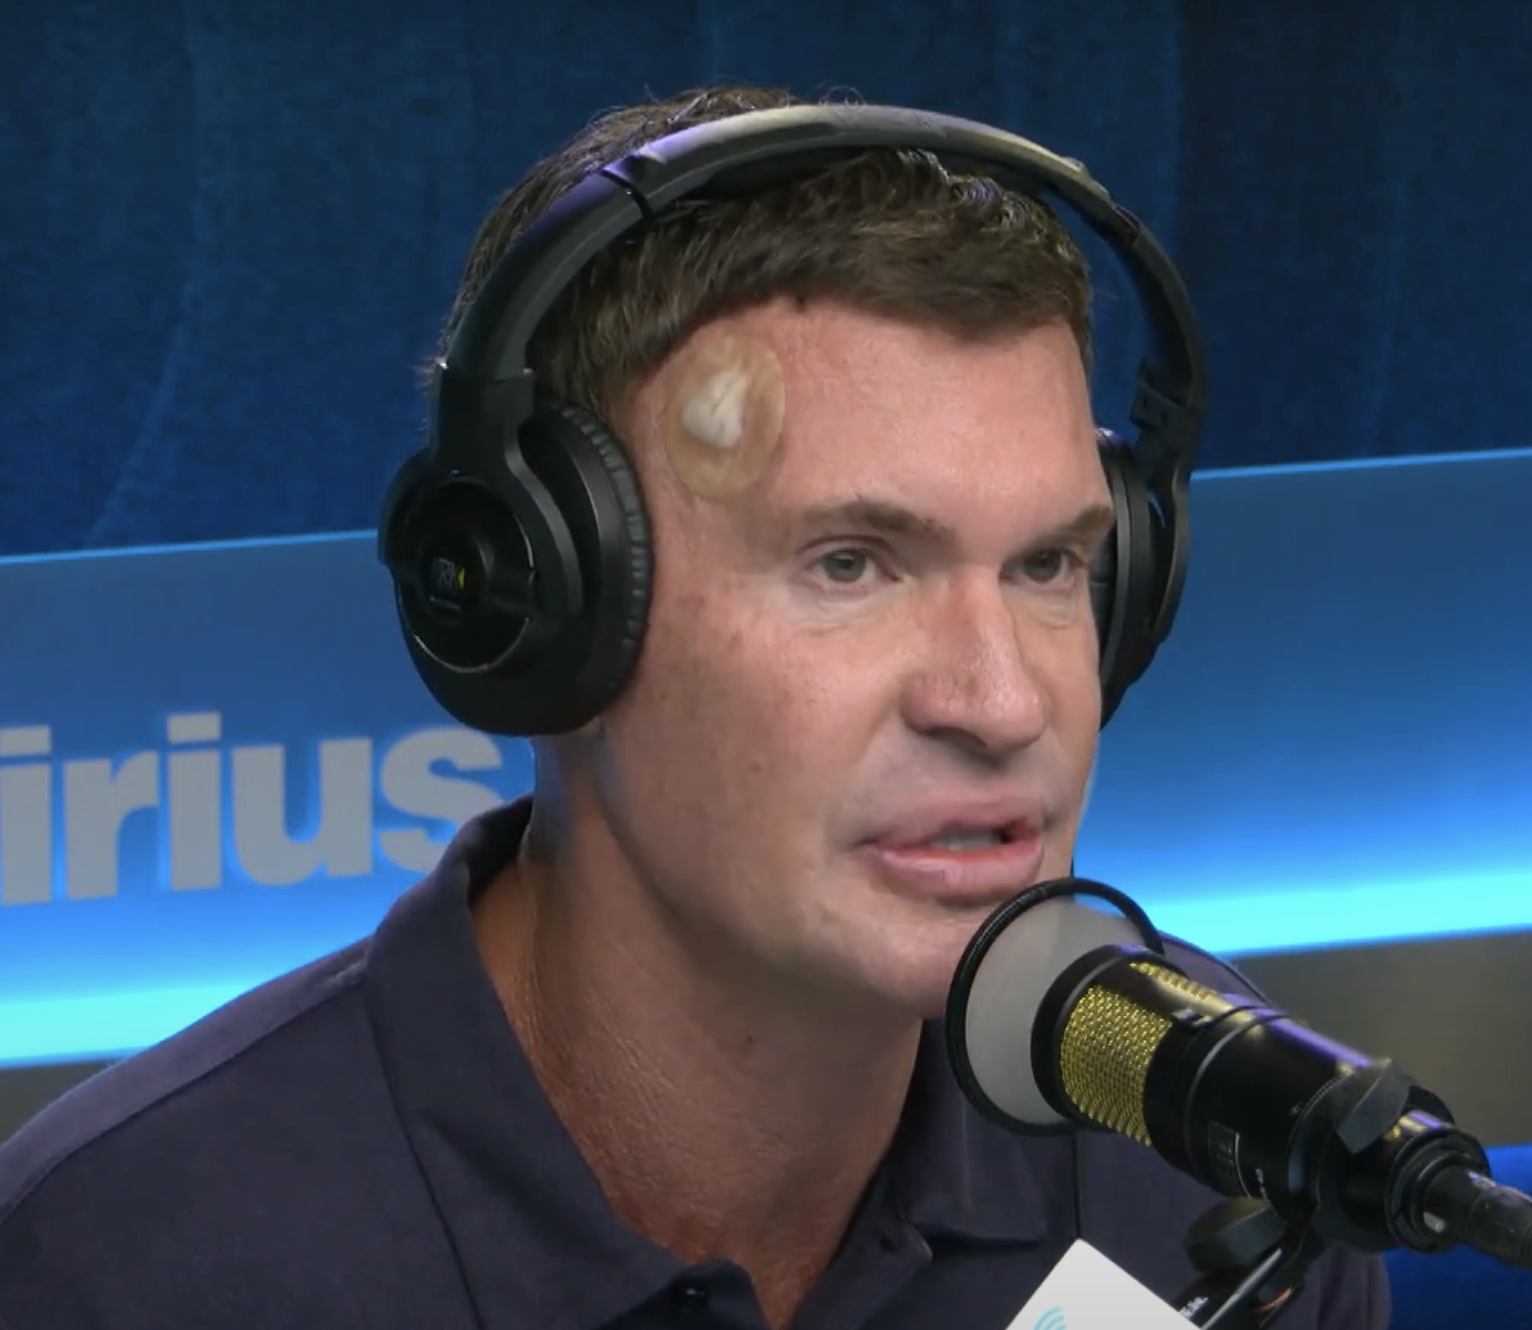 Jeff with a microphone headset in a radio studio, focusing intently